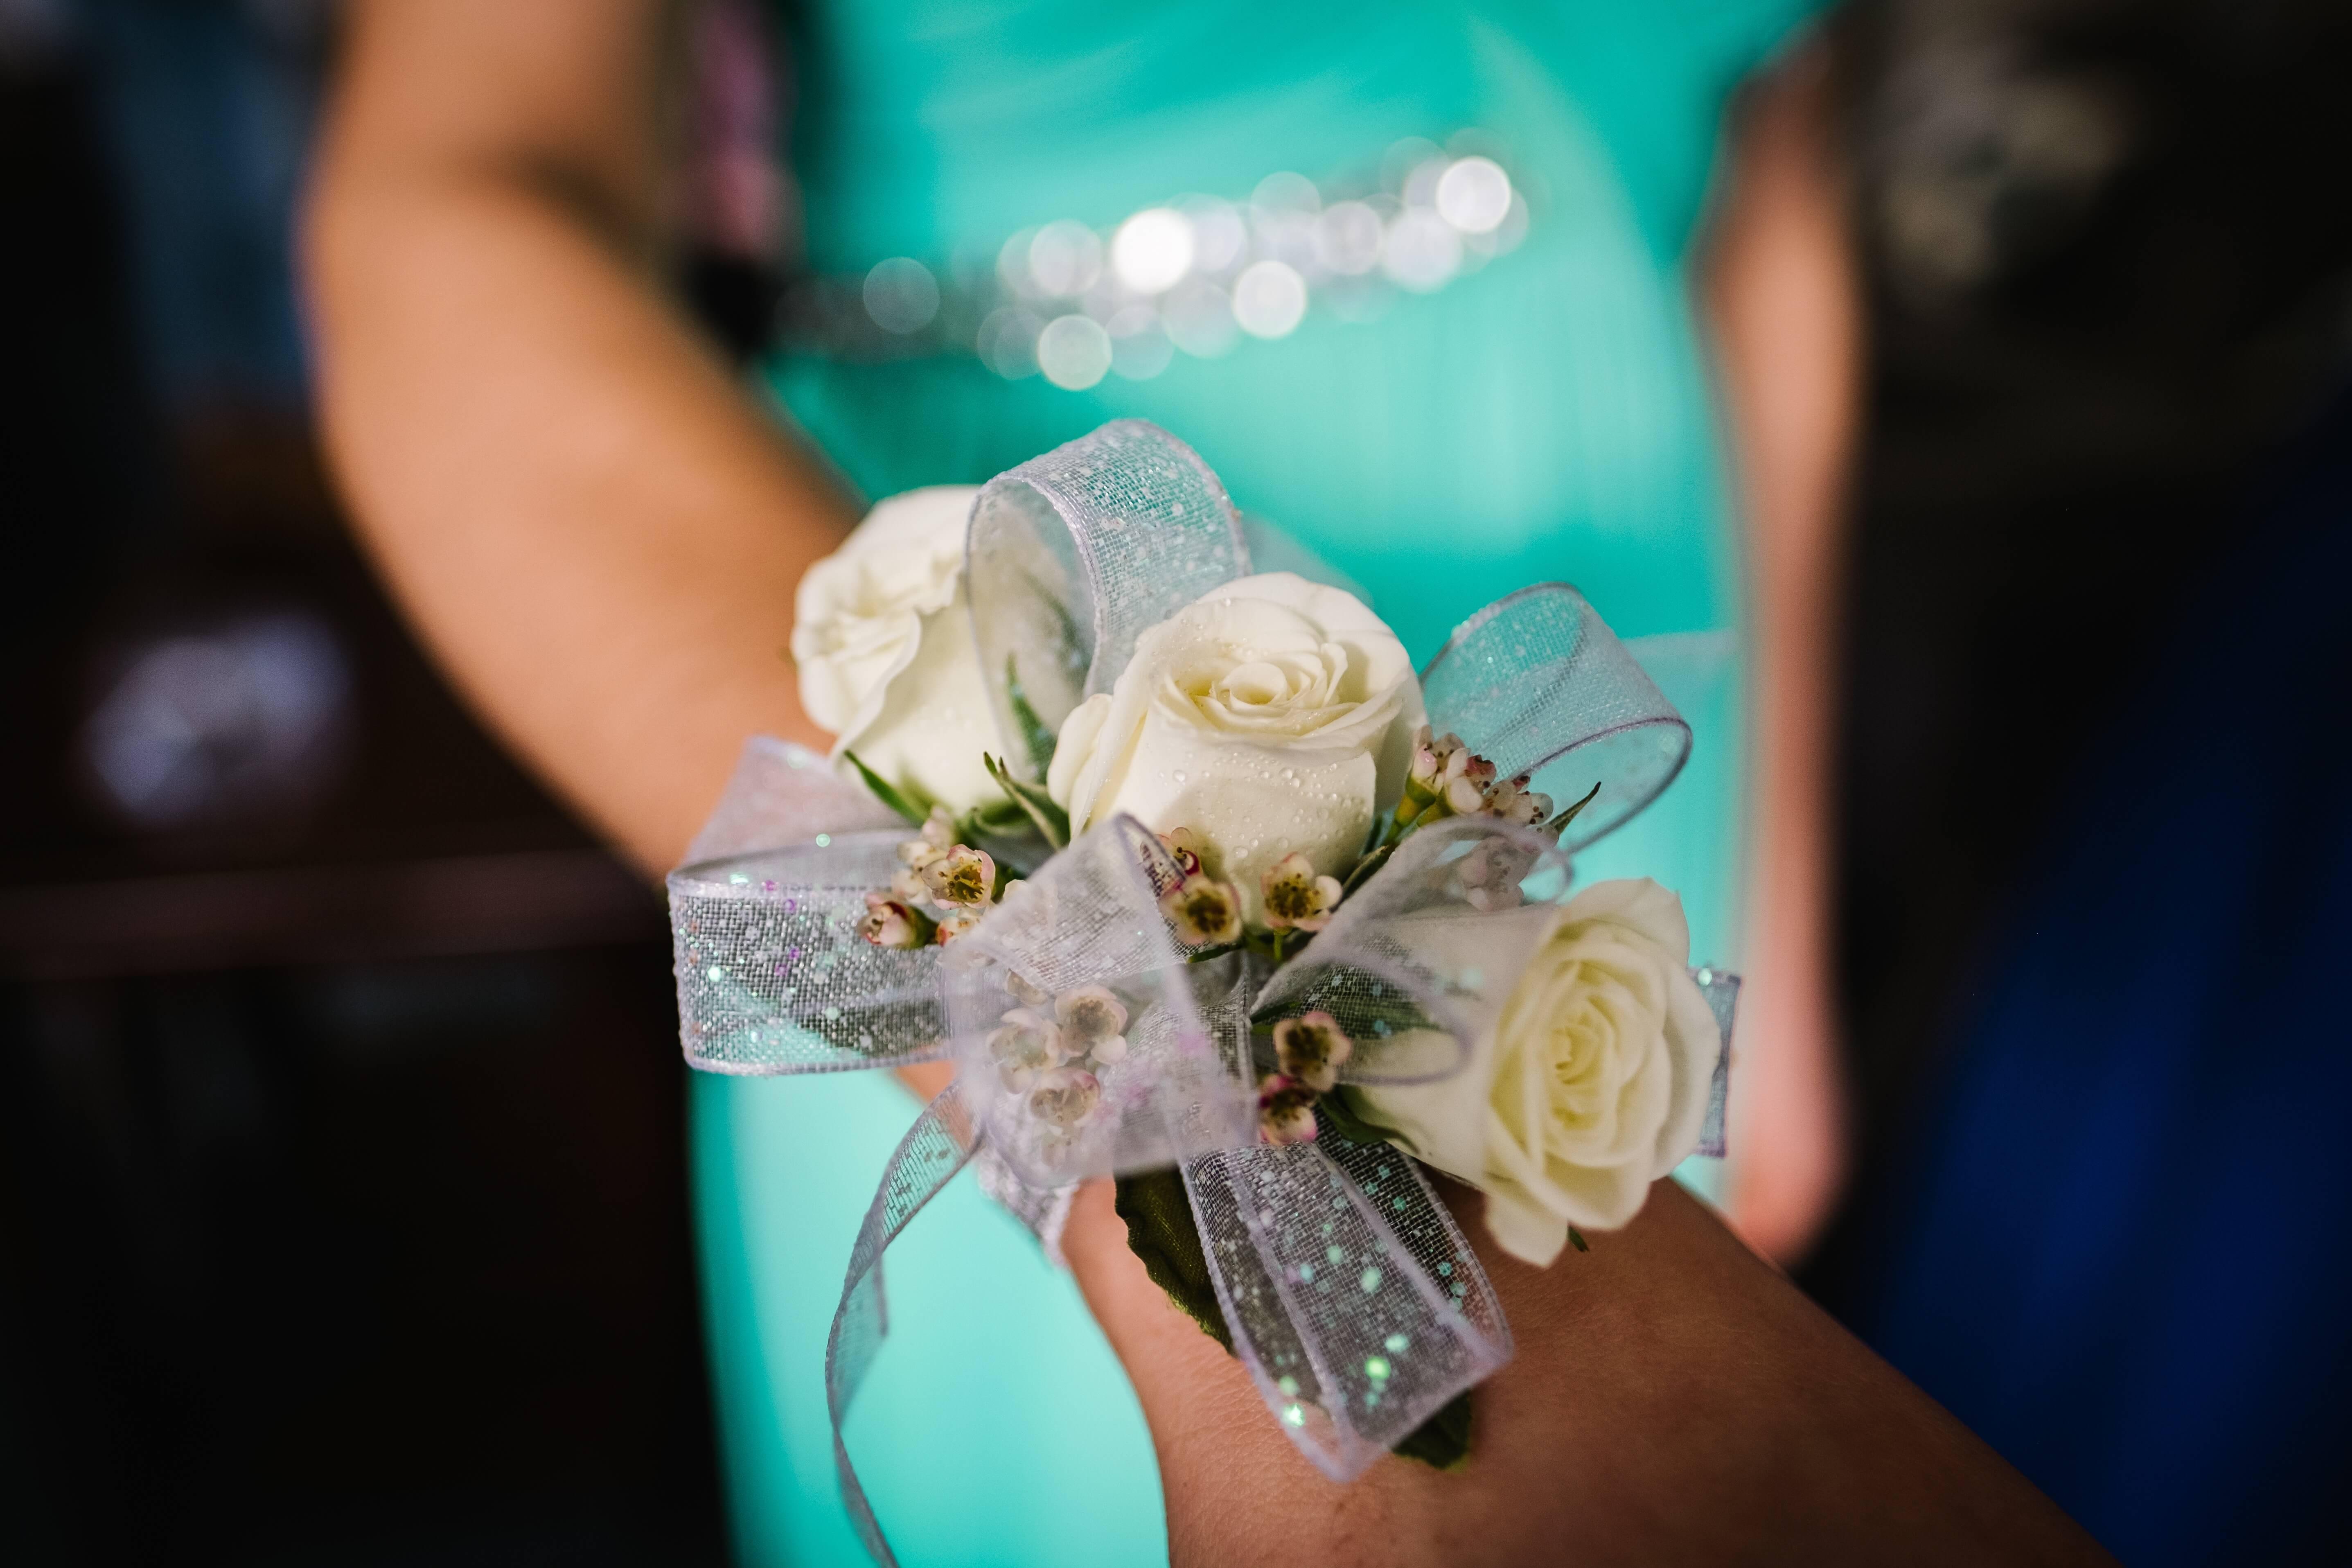 5 Tips for Having an Awesome Prom